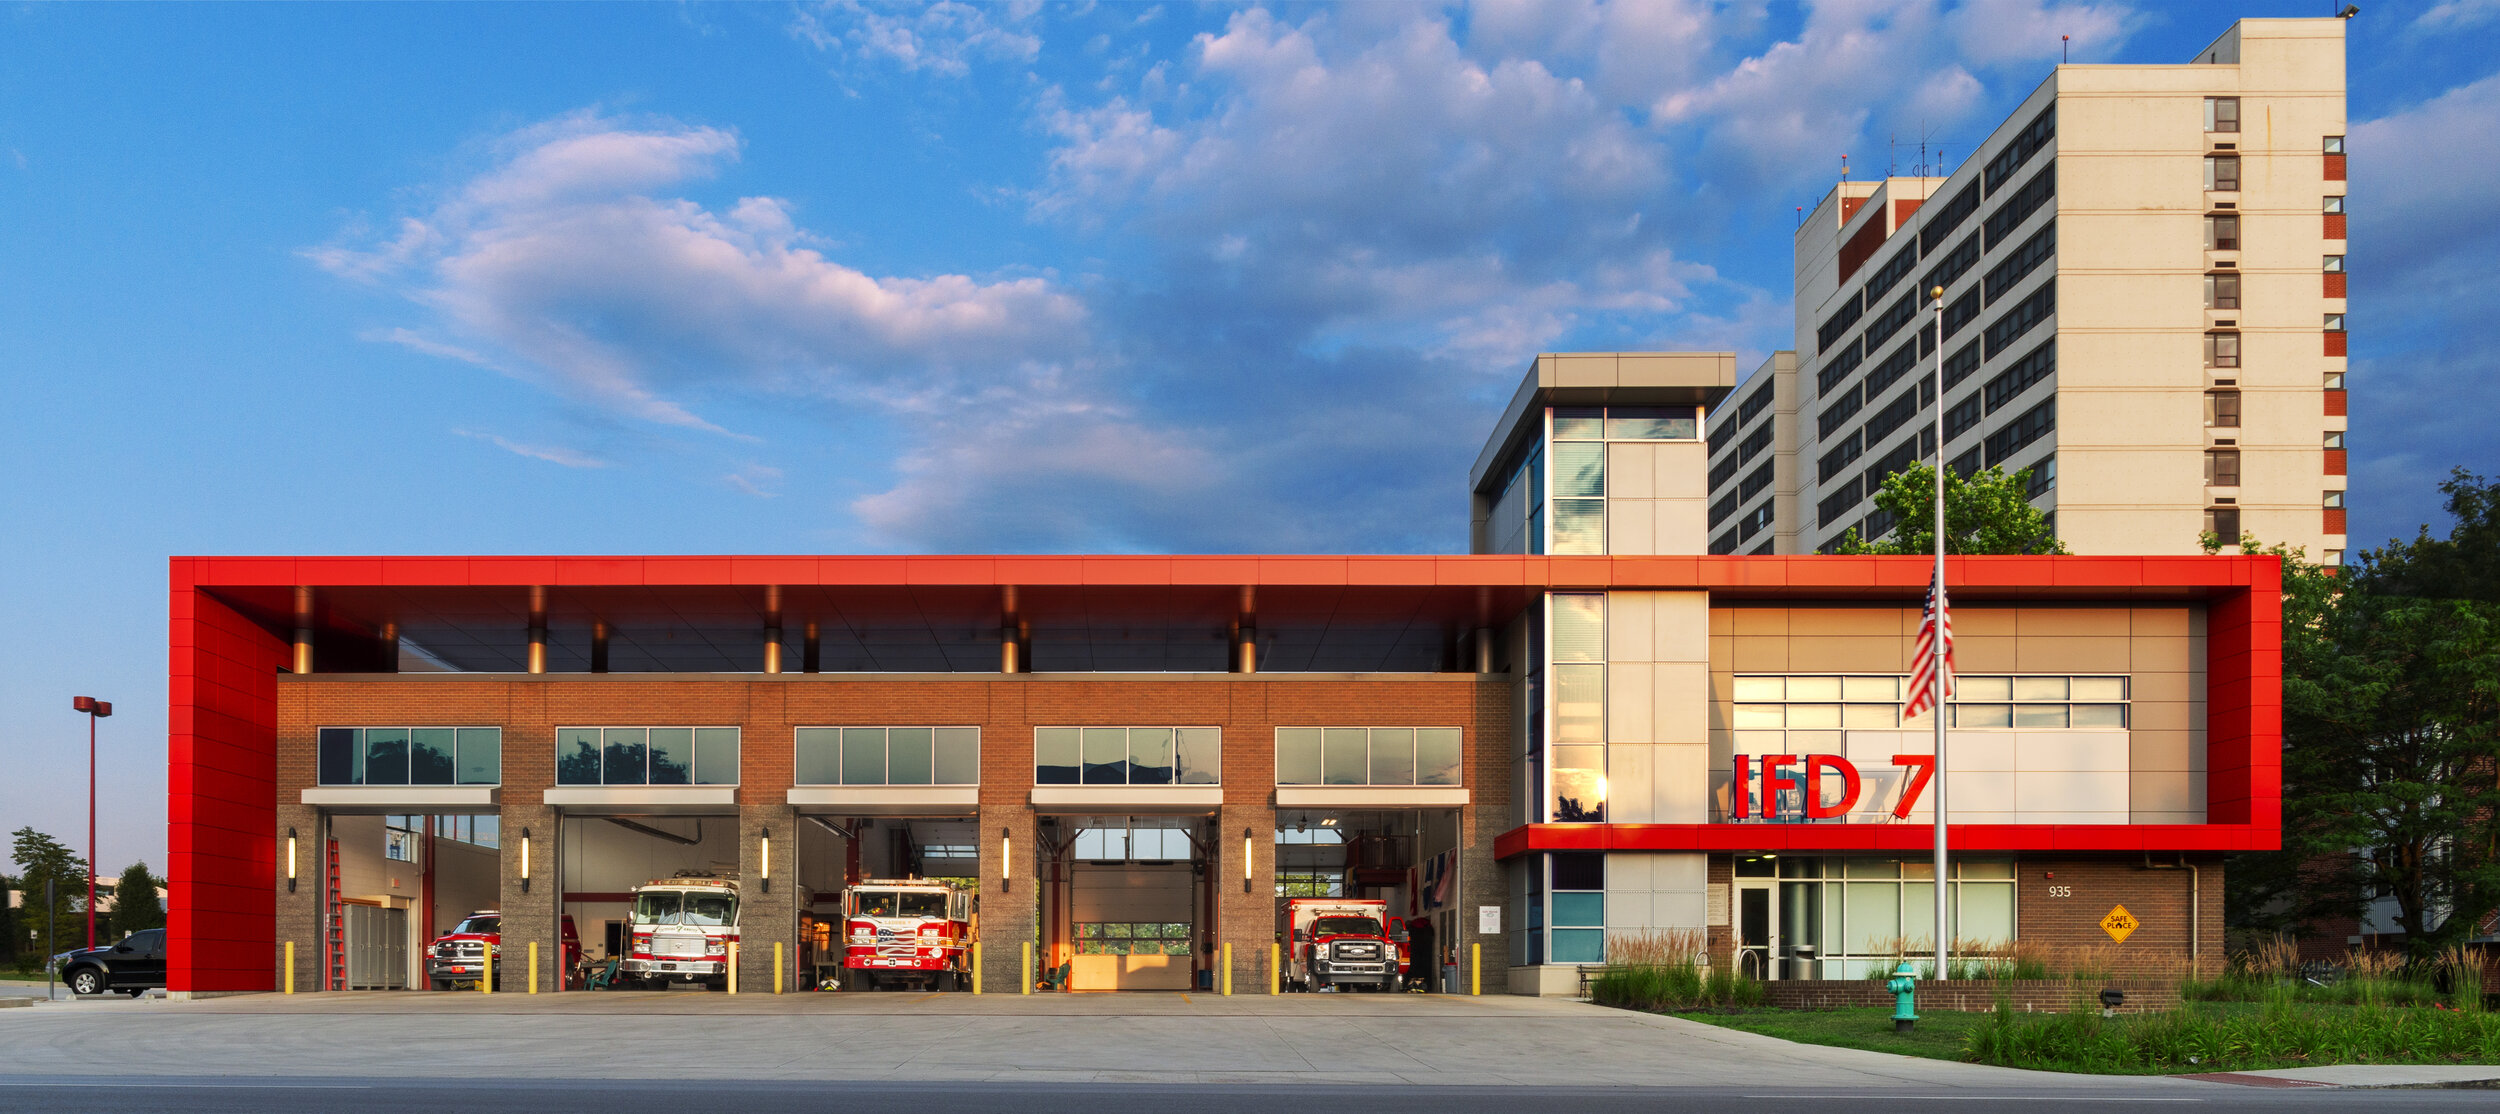 Architectural photo showing a Fire Department building with several fire trucks.